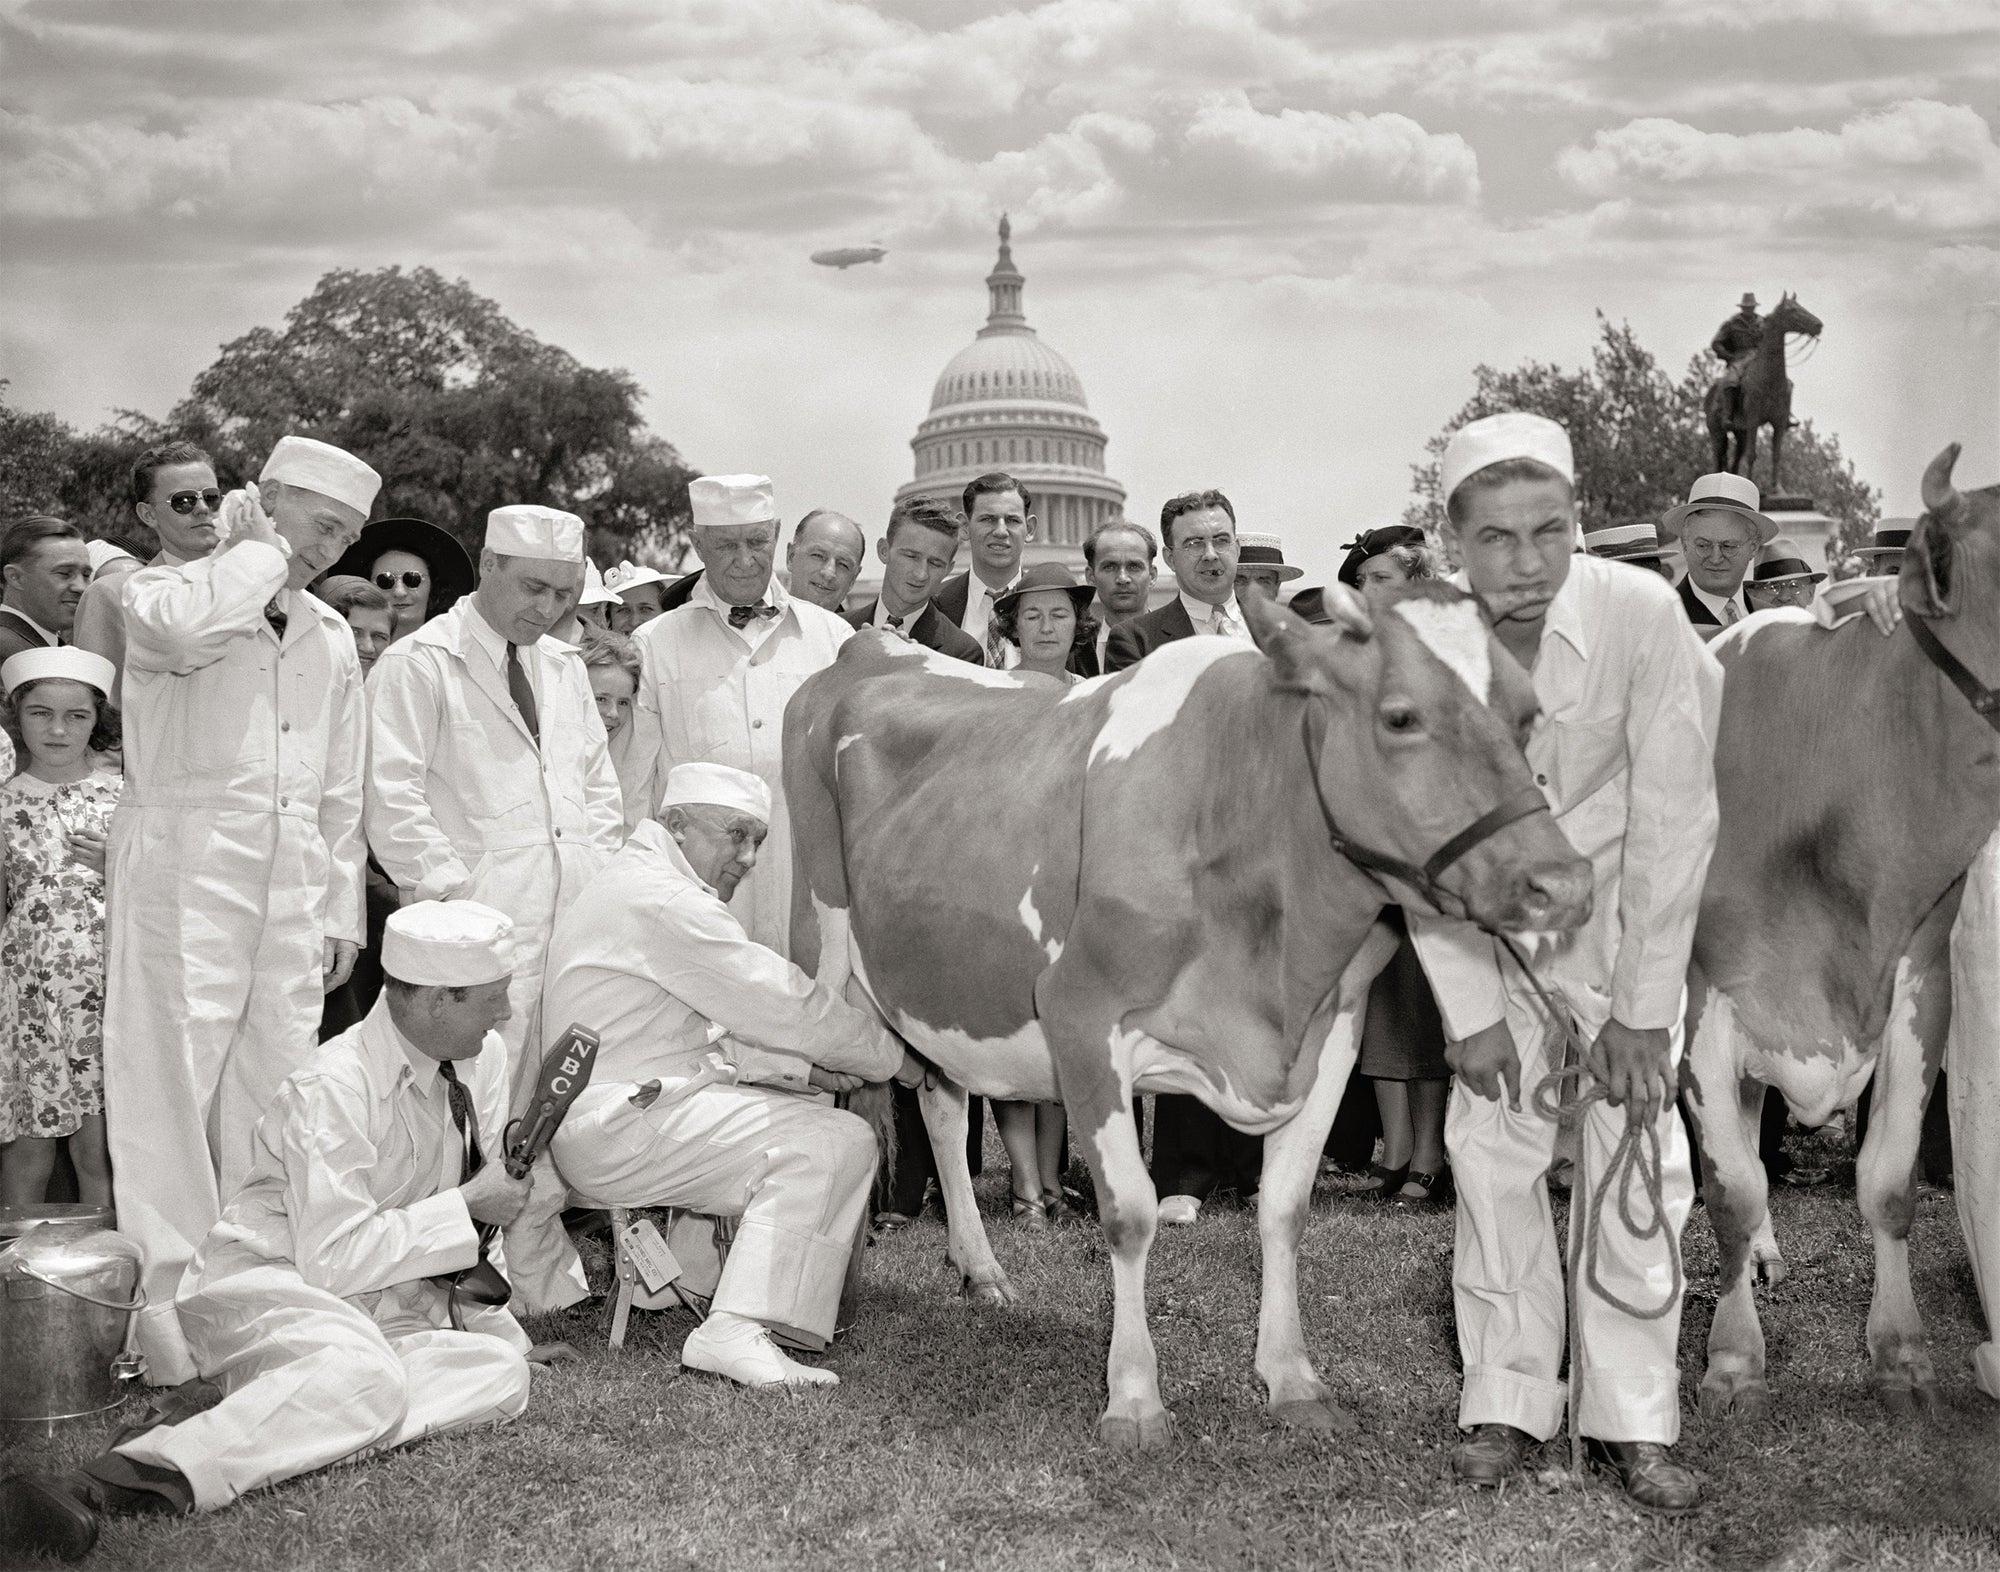 Congressional Milking Contest including congressmen and cow, 1938 Historical Pix